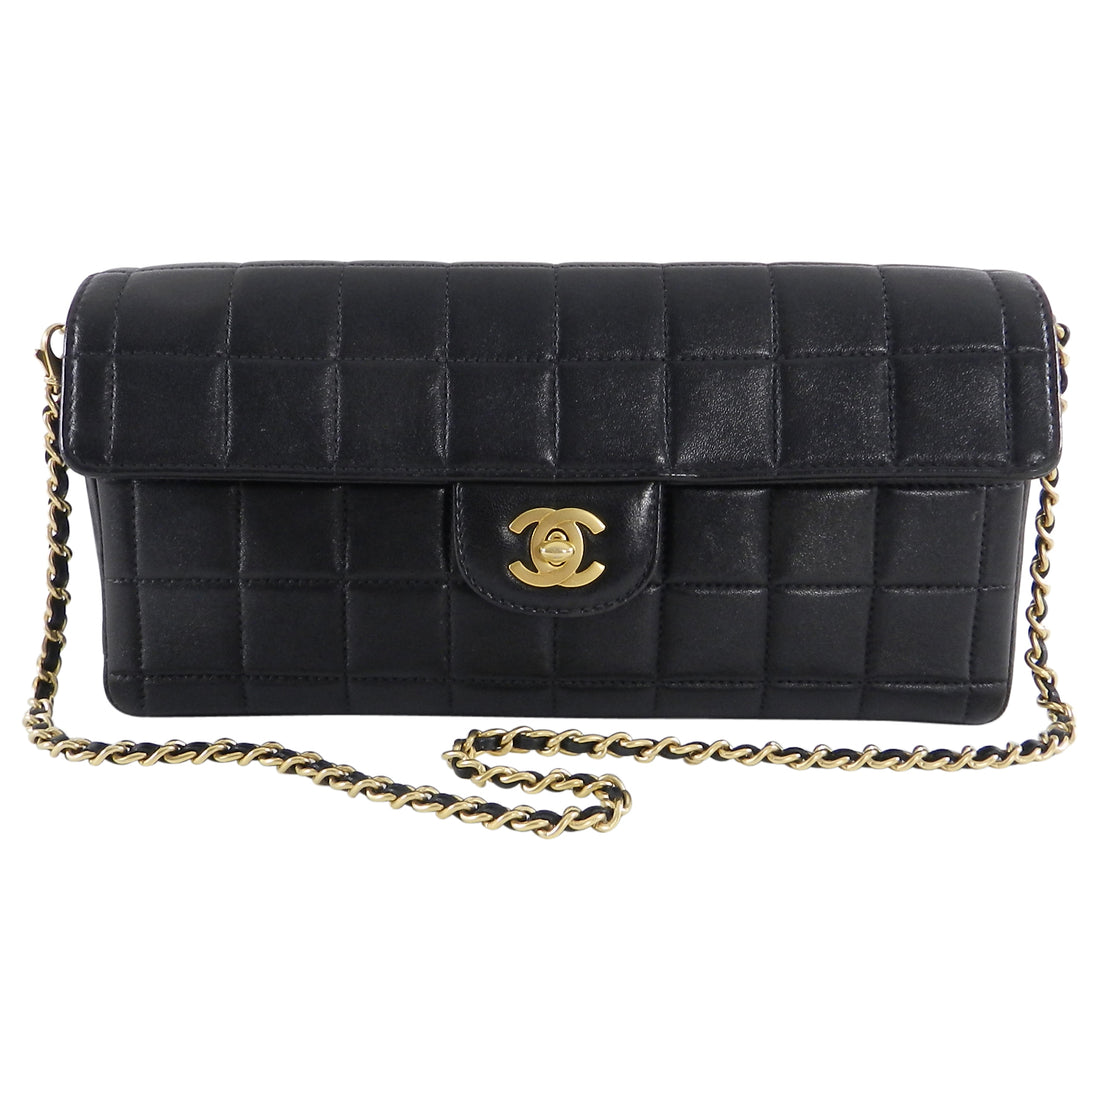 I miss you vintage - Chanel black chocolate bar east west flap bag. . . .  Available in store or purchase online with free ship in Canada. Find  additional photos and details